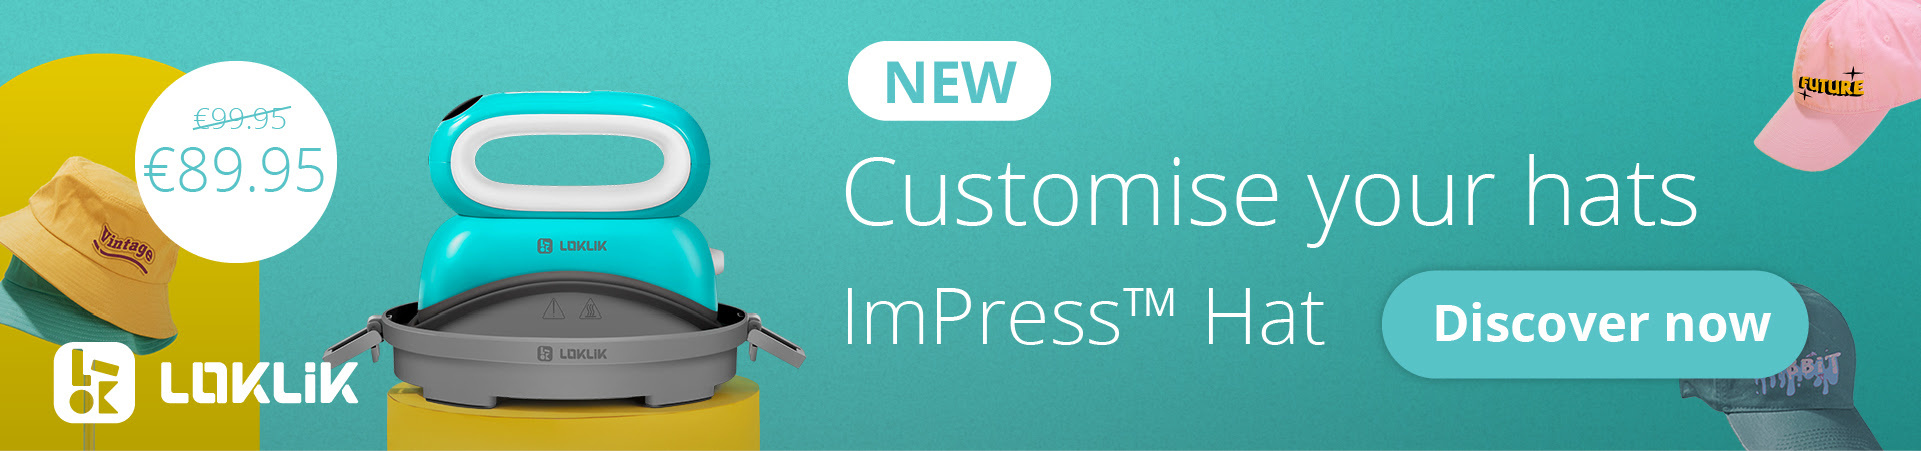 Discover the new LOKLiK ImPress™ Hat at the launch price of €89.95 instead of €99.95. Available now.